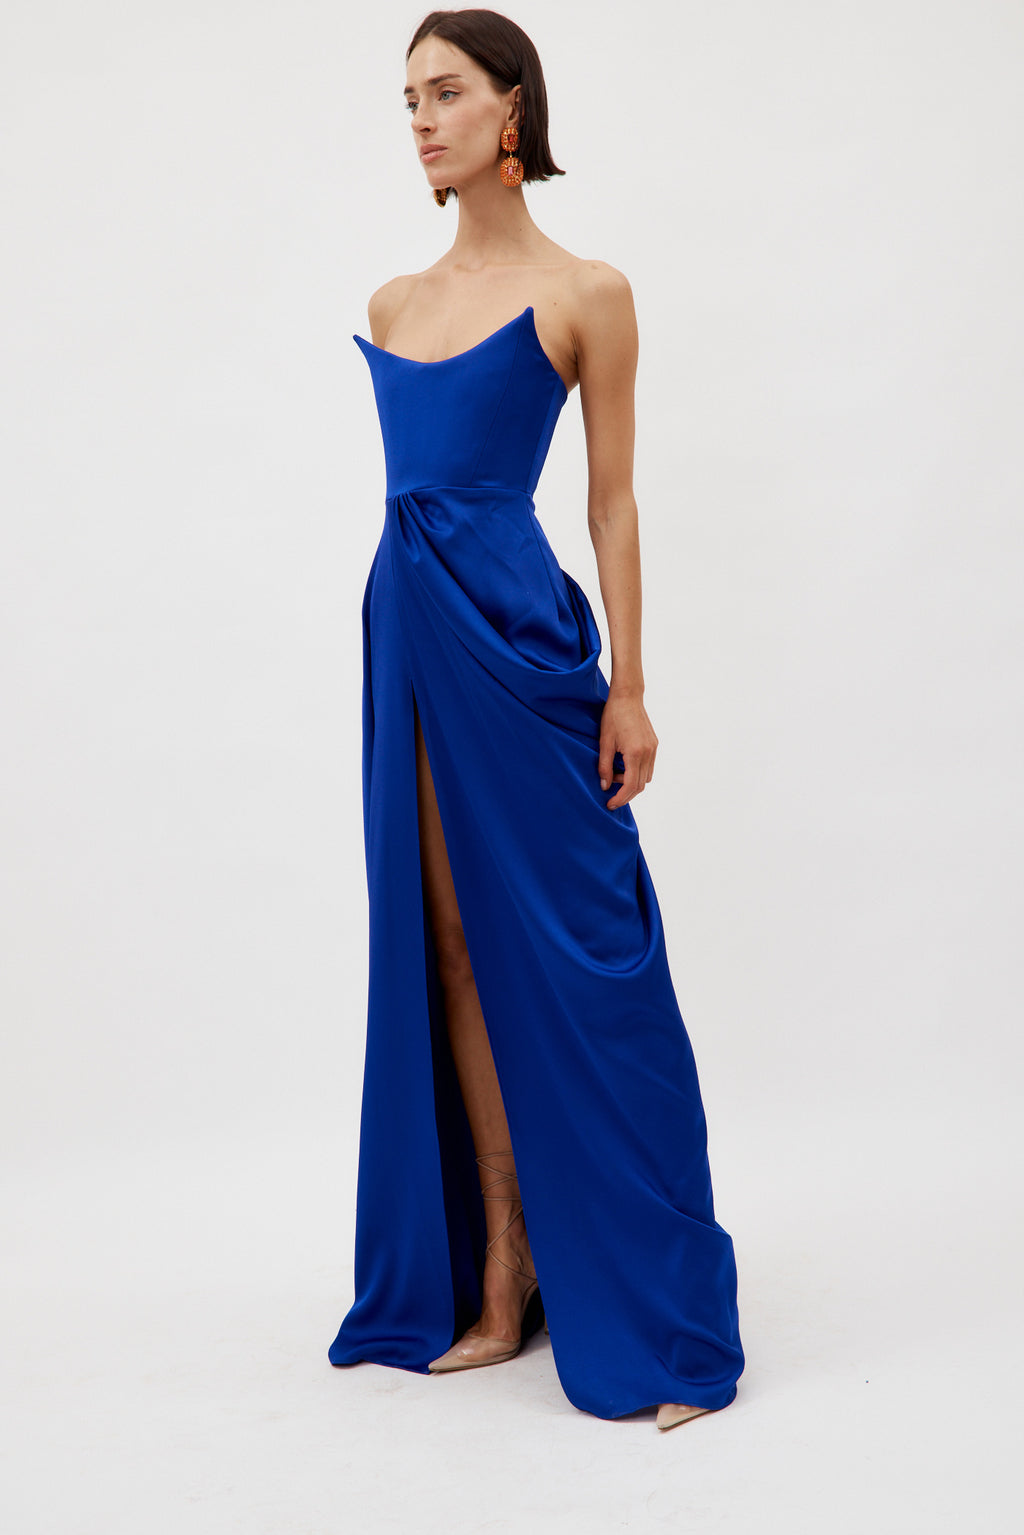 Satin Crepe Curved Strapless Drape Ultramarine Gown